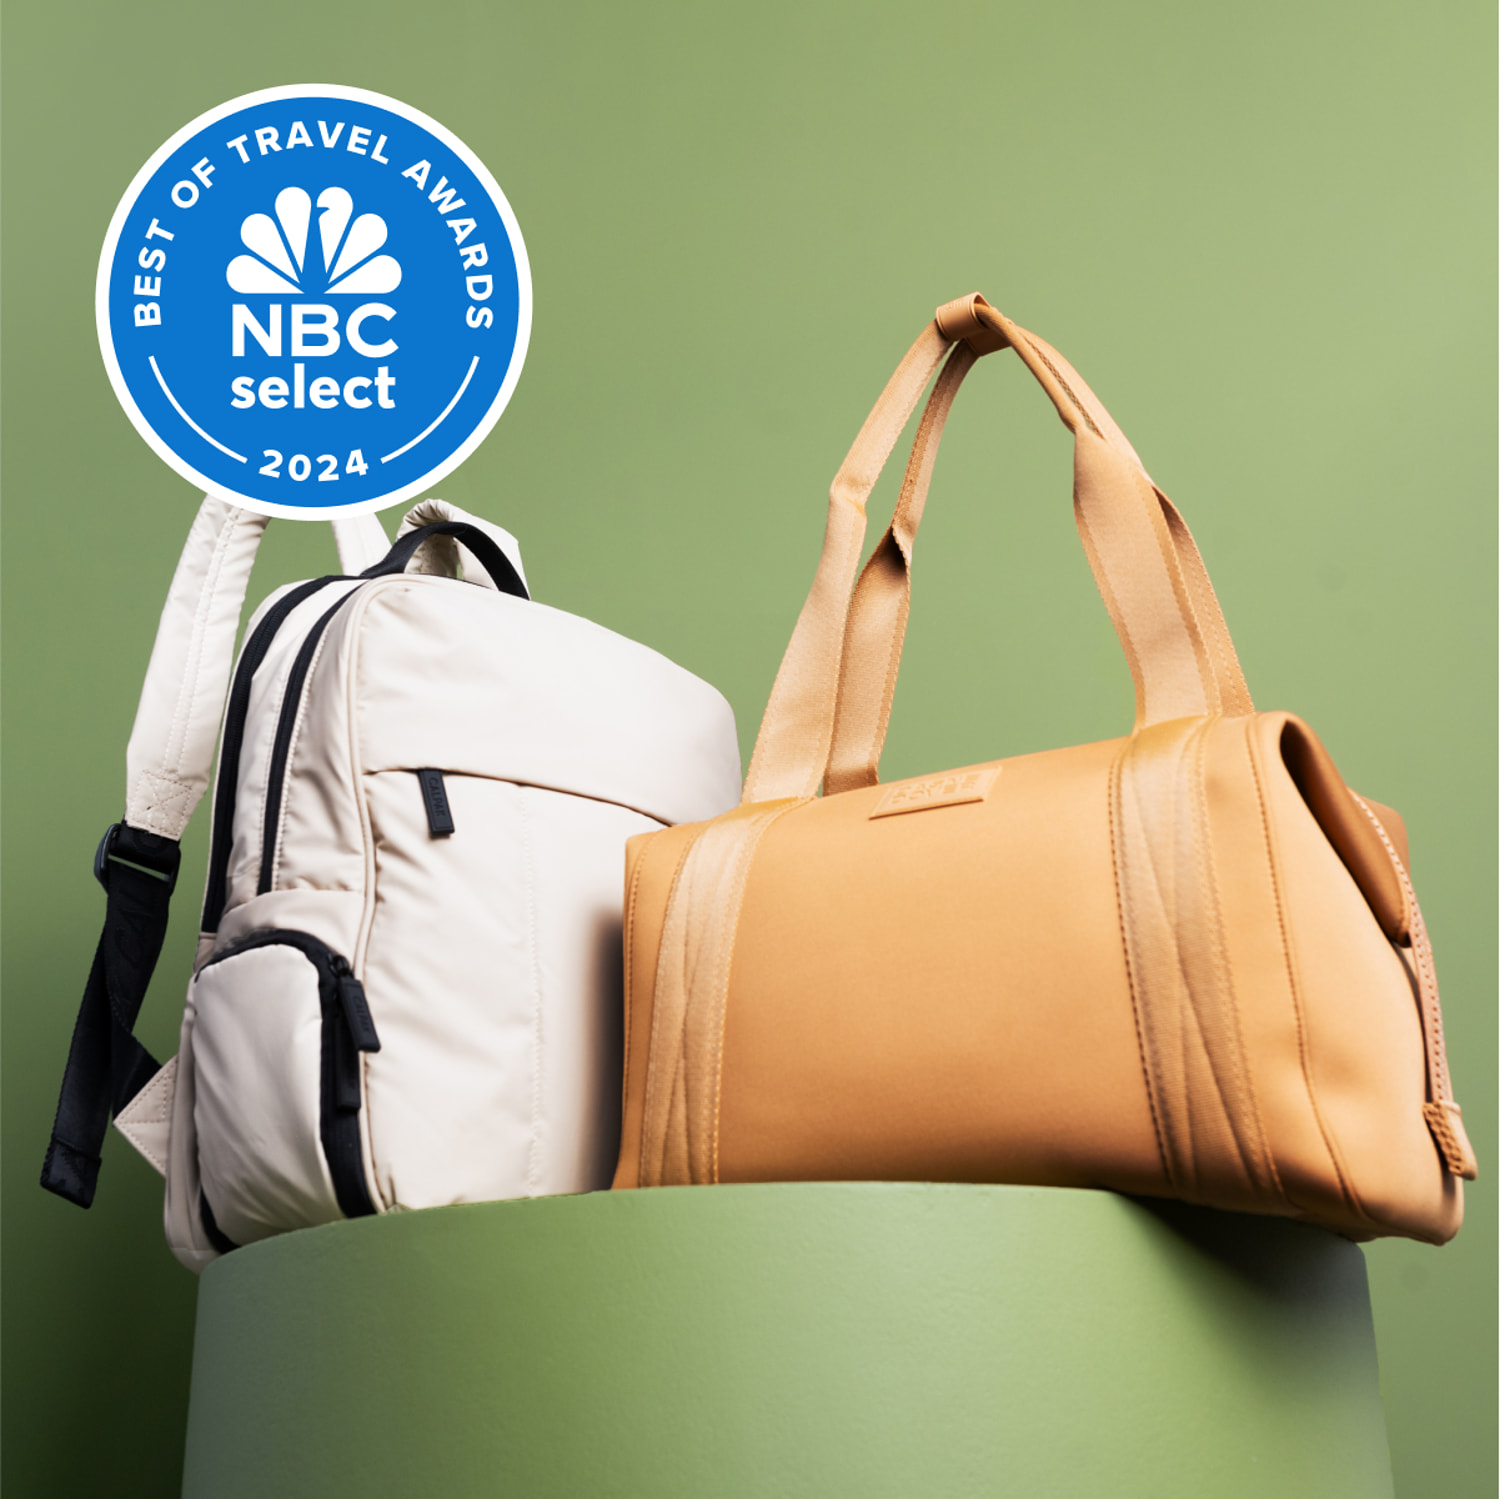 NBC Select Travel Awards: The best bags of 2024